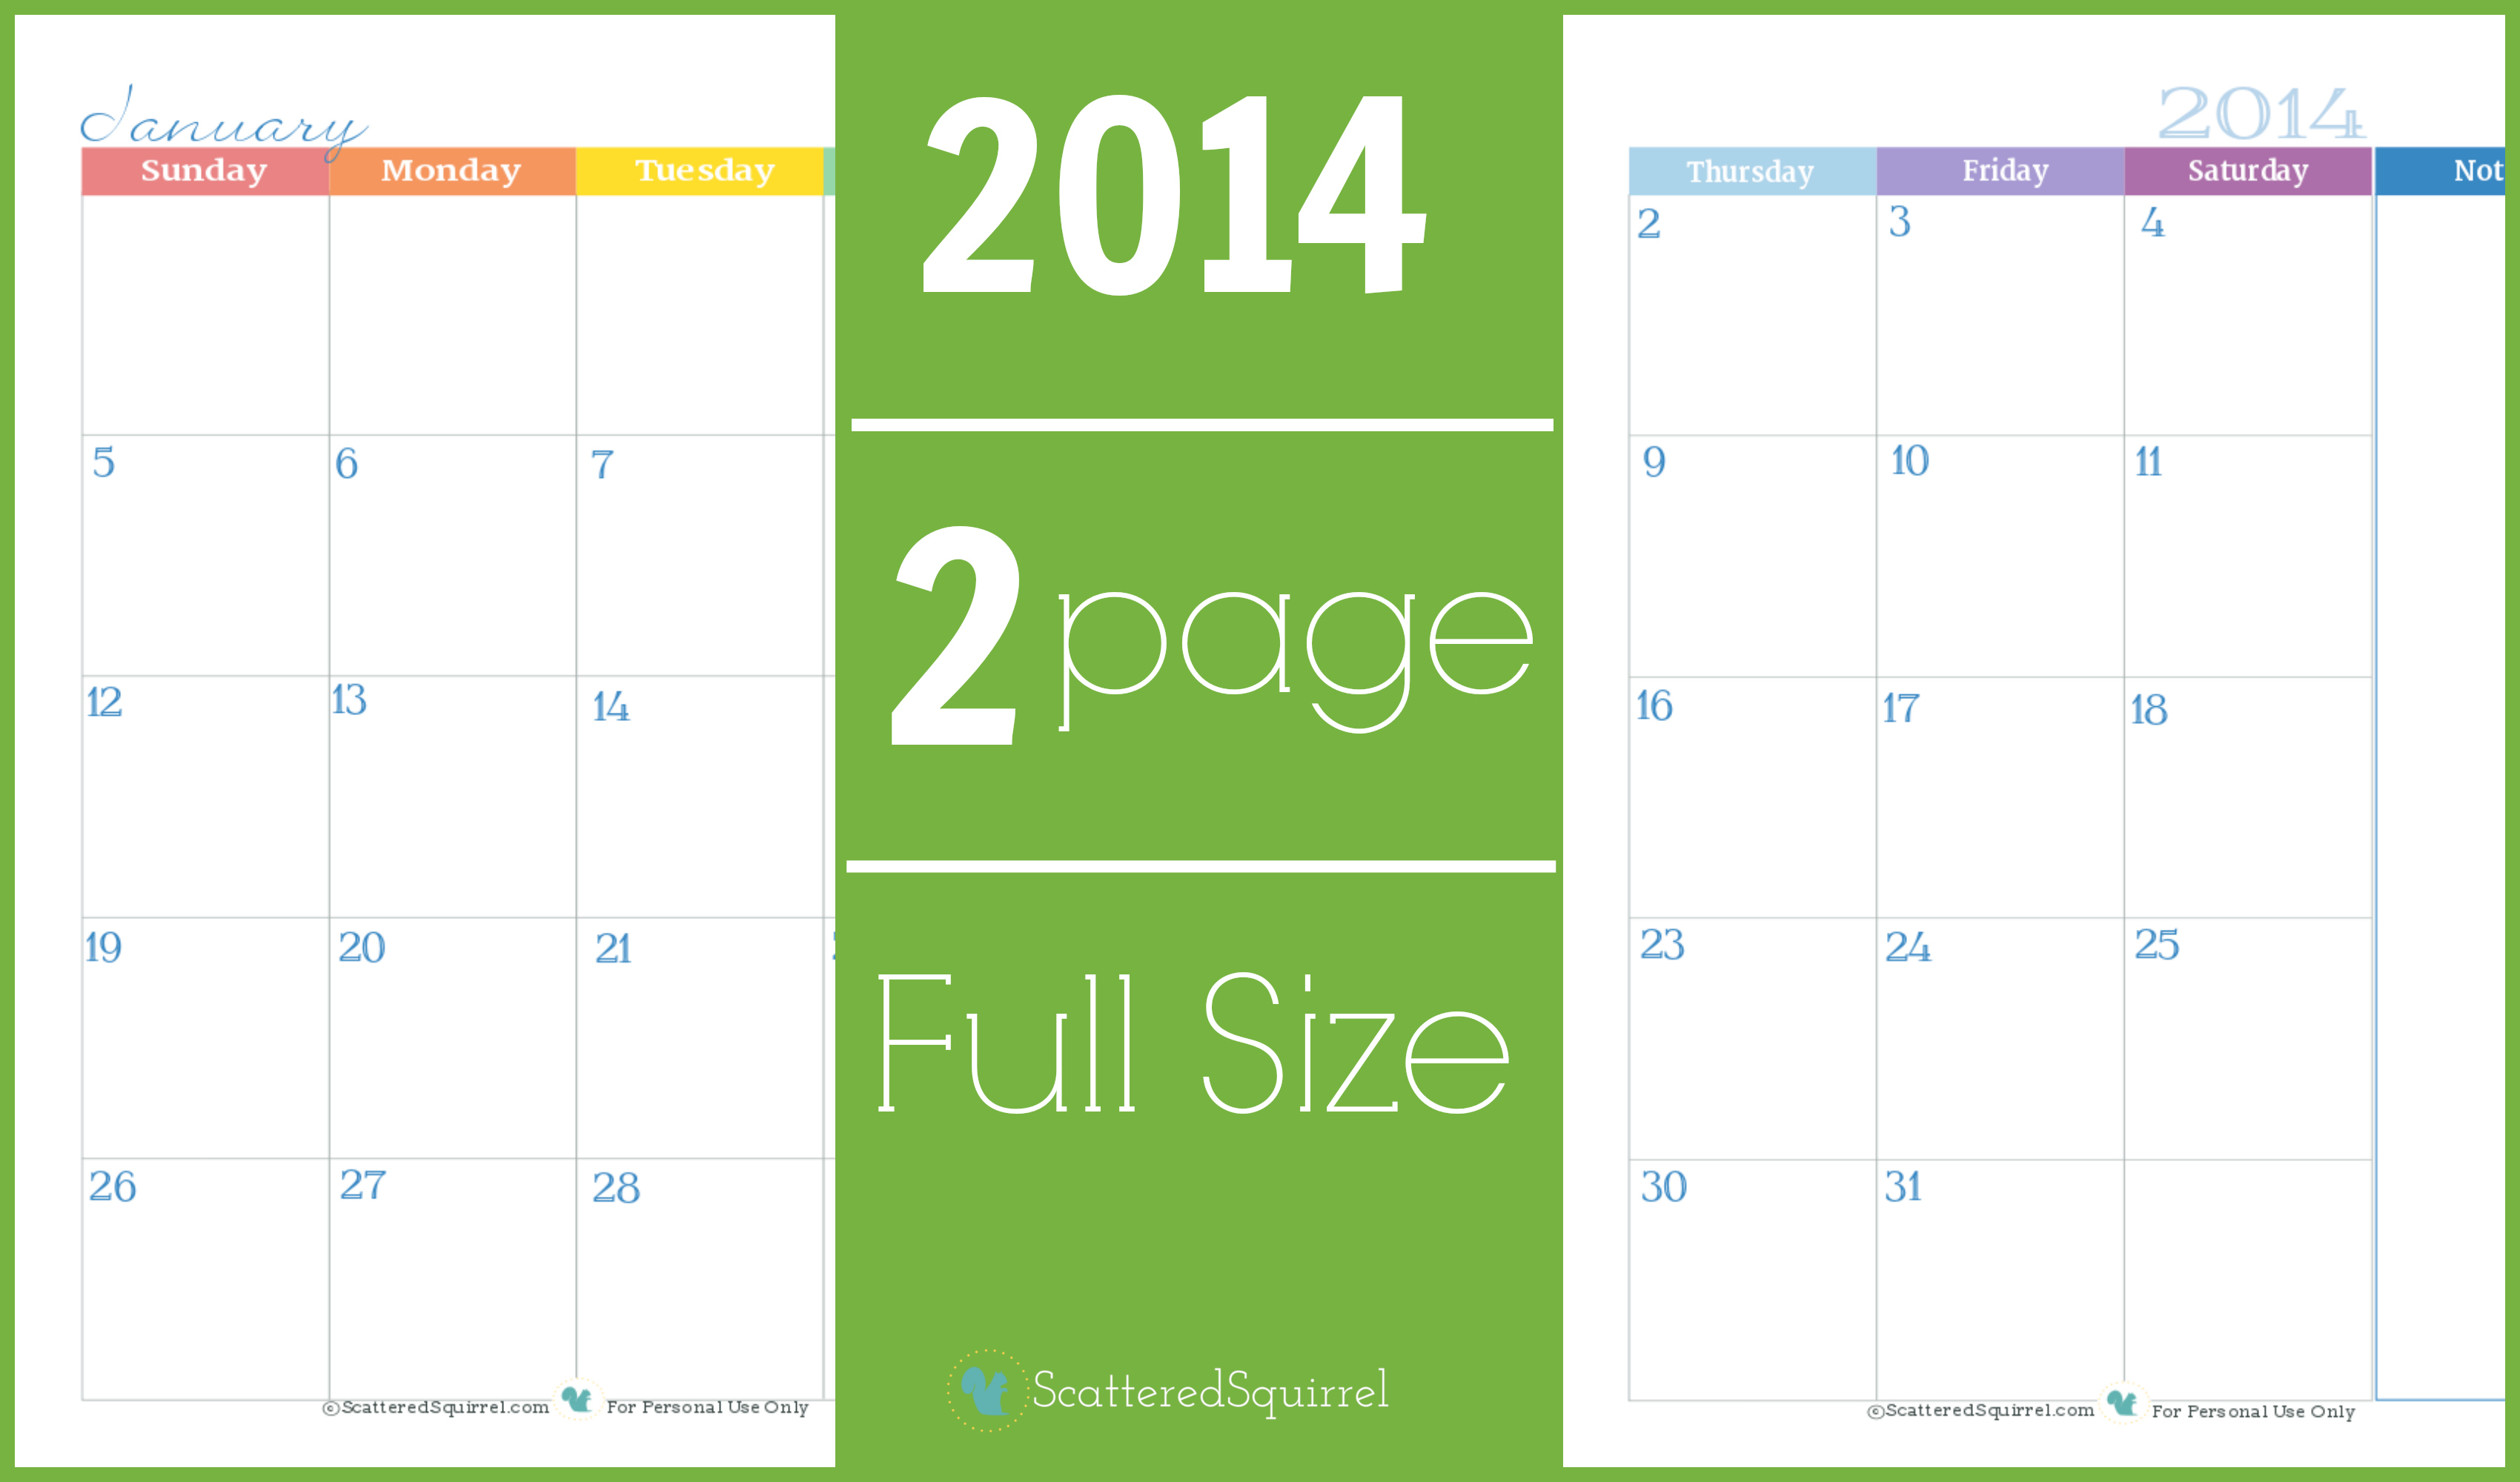 2014-calendar-two-page-monthly-scattered-squirrel